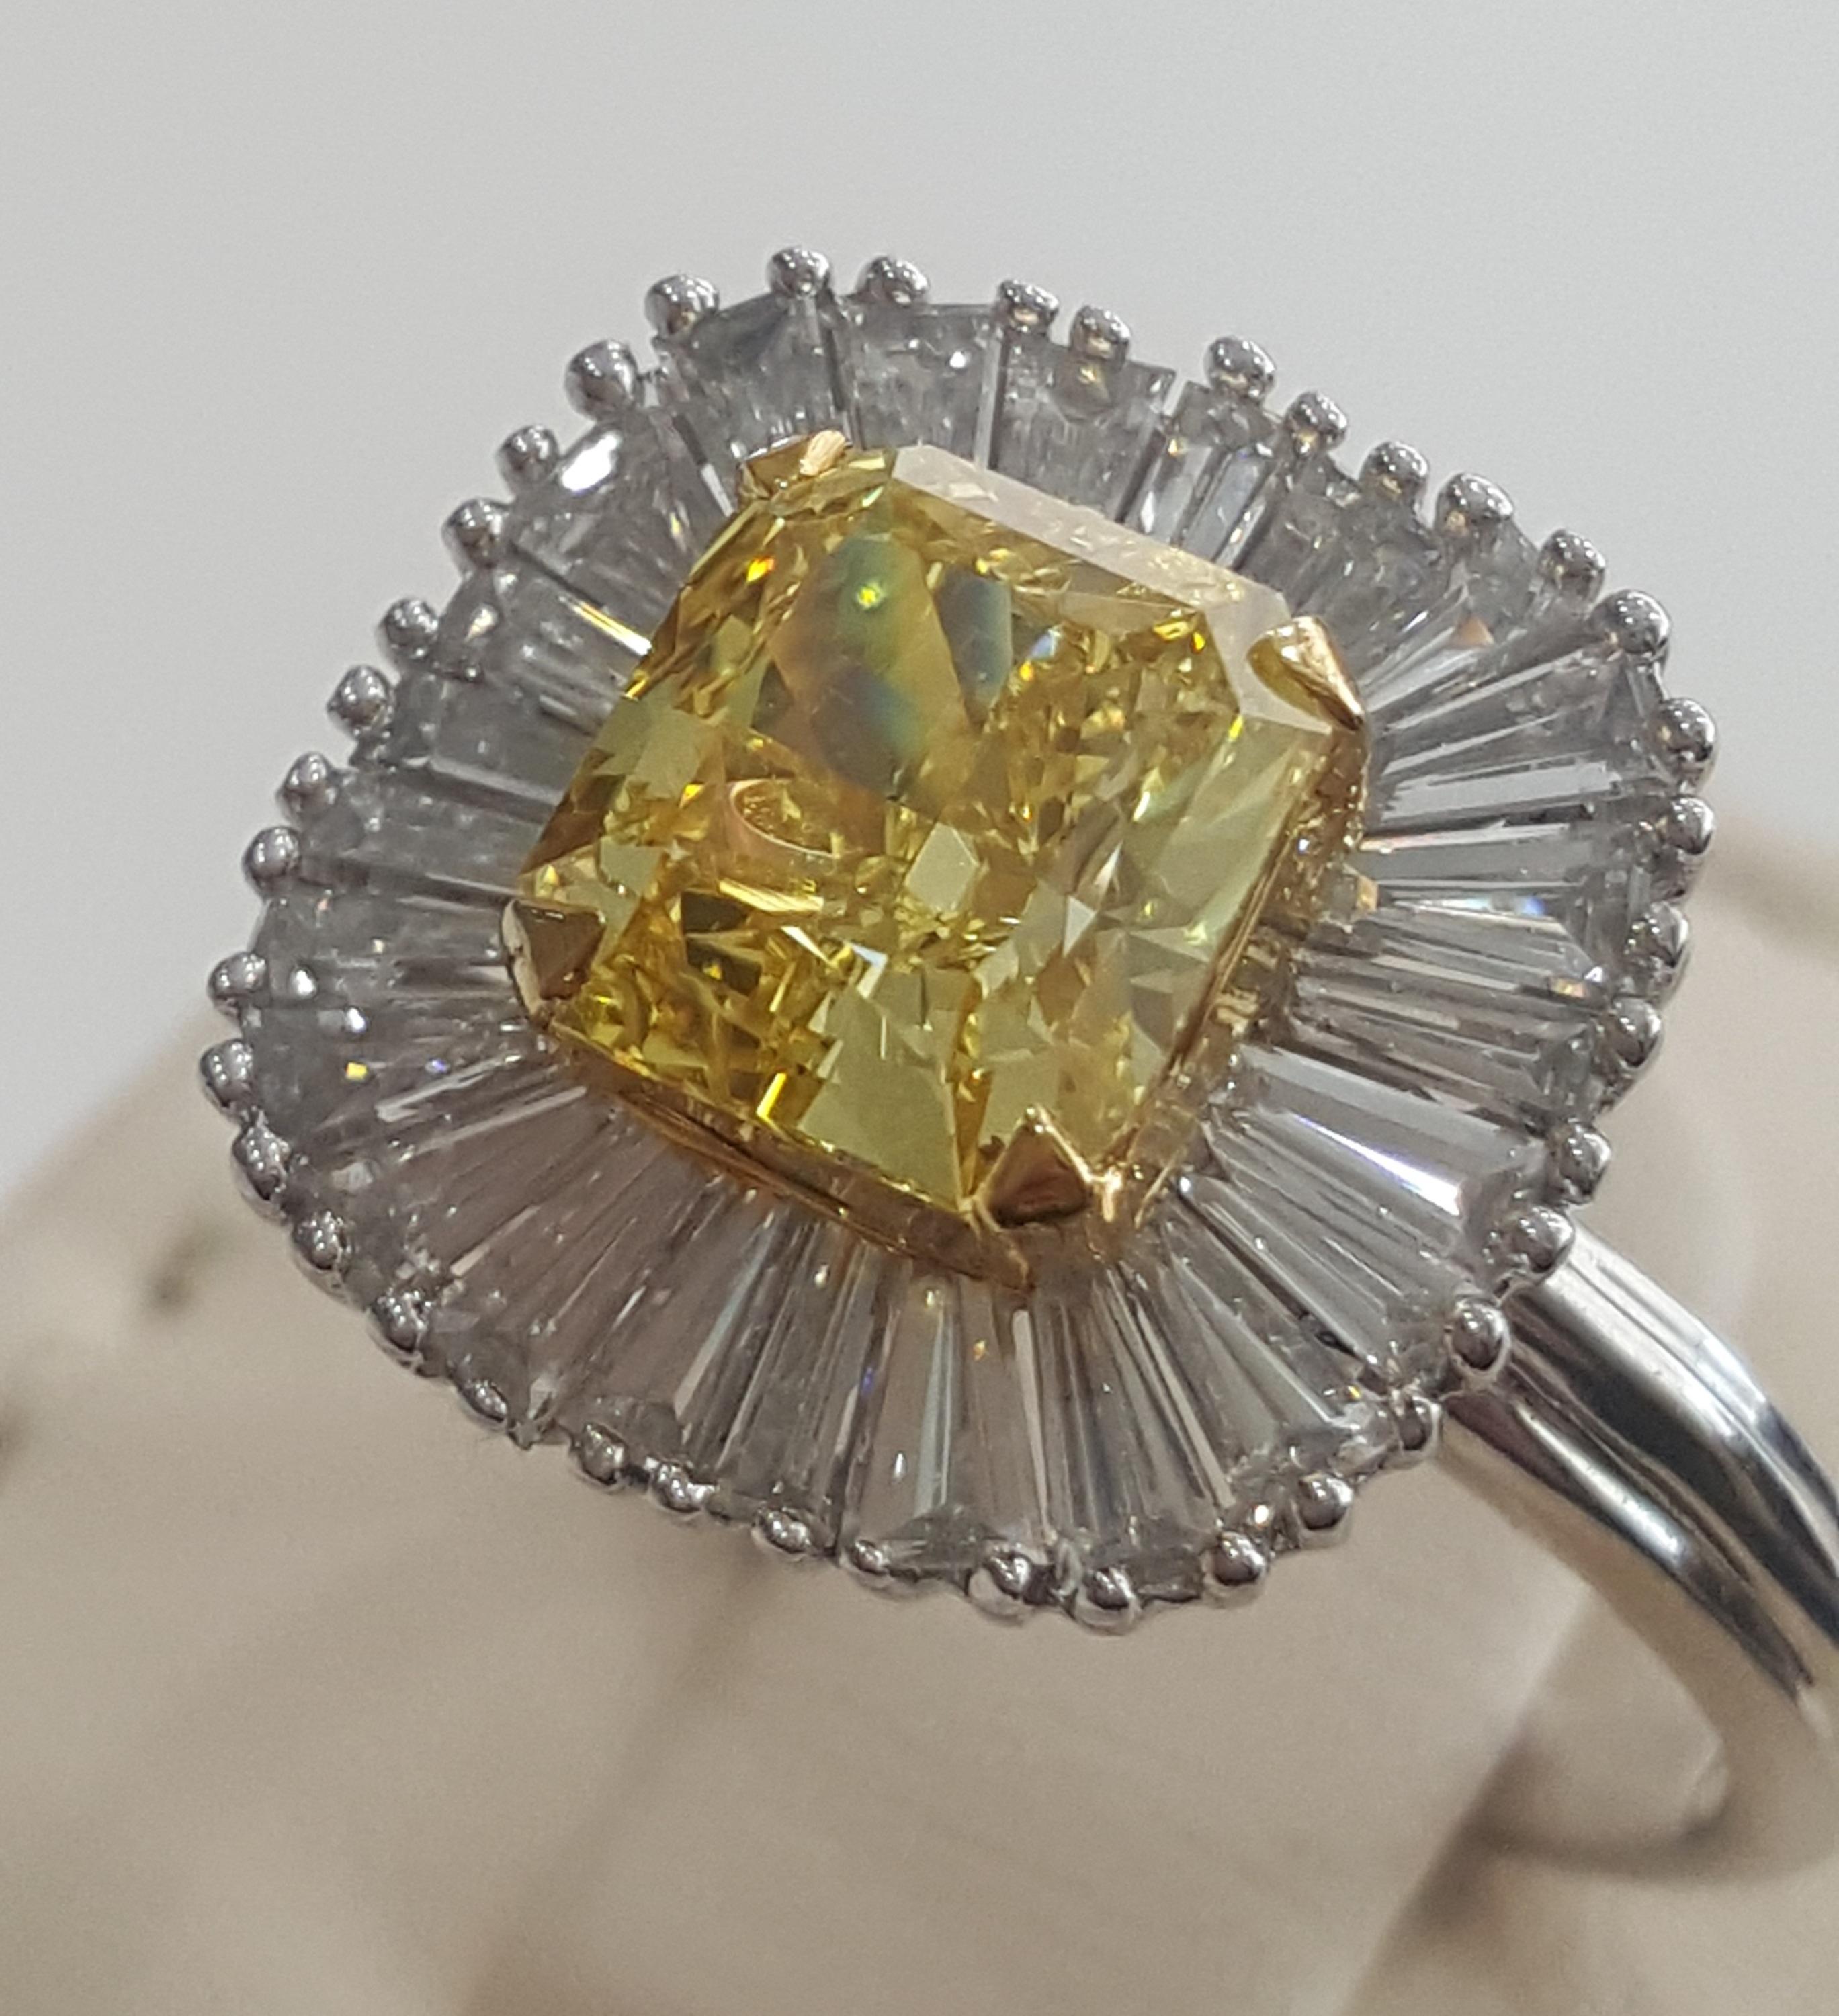 This understated, elegant and enticing ring created by Moguldiam Inc in 18 k white gold features a GIA certified natural fancy vivid yellow Radiant weighing 2.02 carat with VS2 clarity with a halo of tapered baguette accent diamonds weighing 1.10